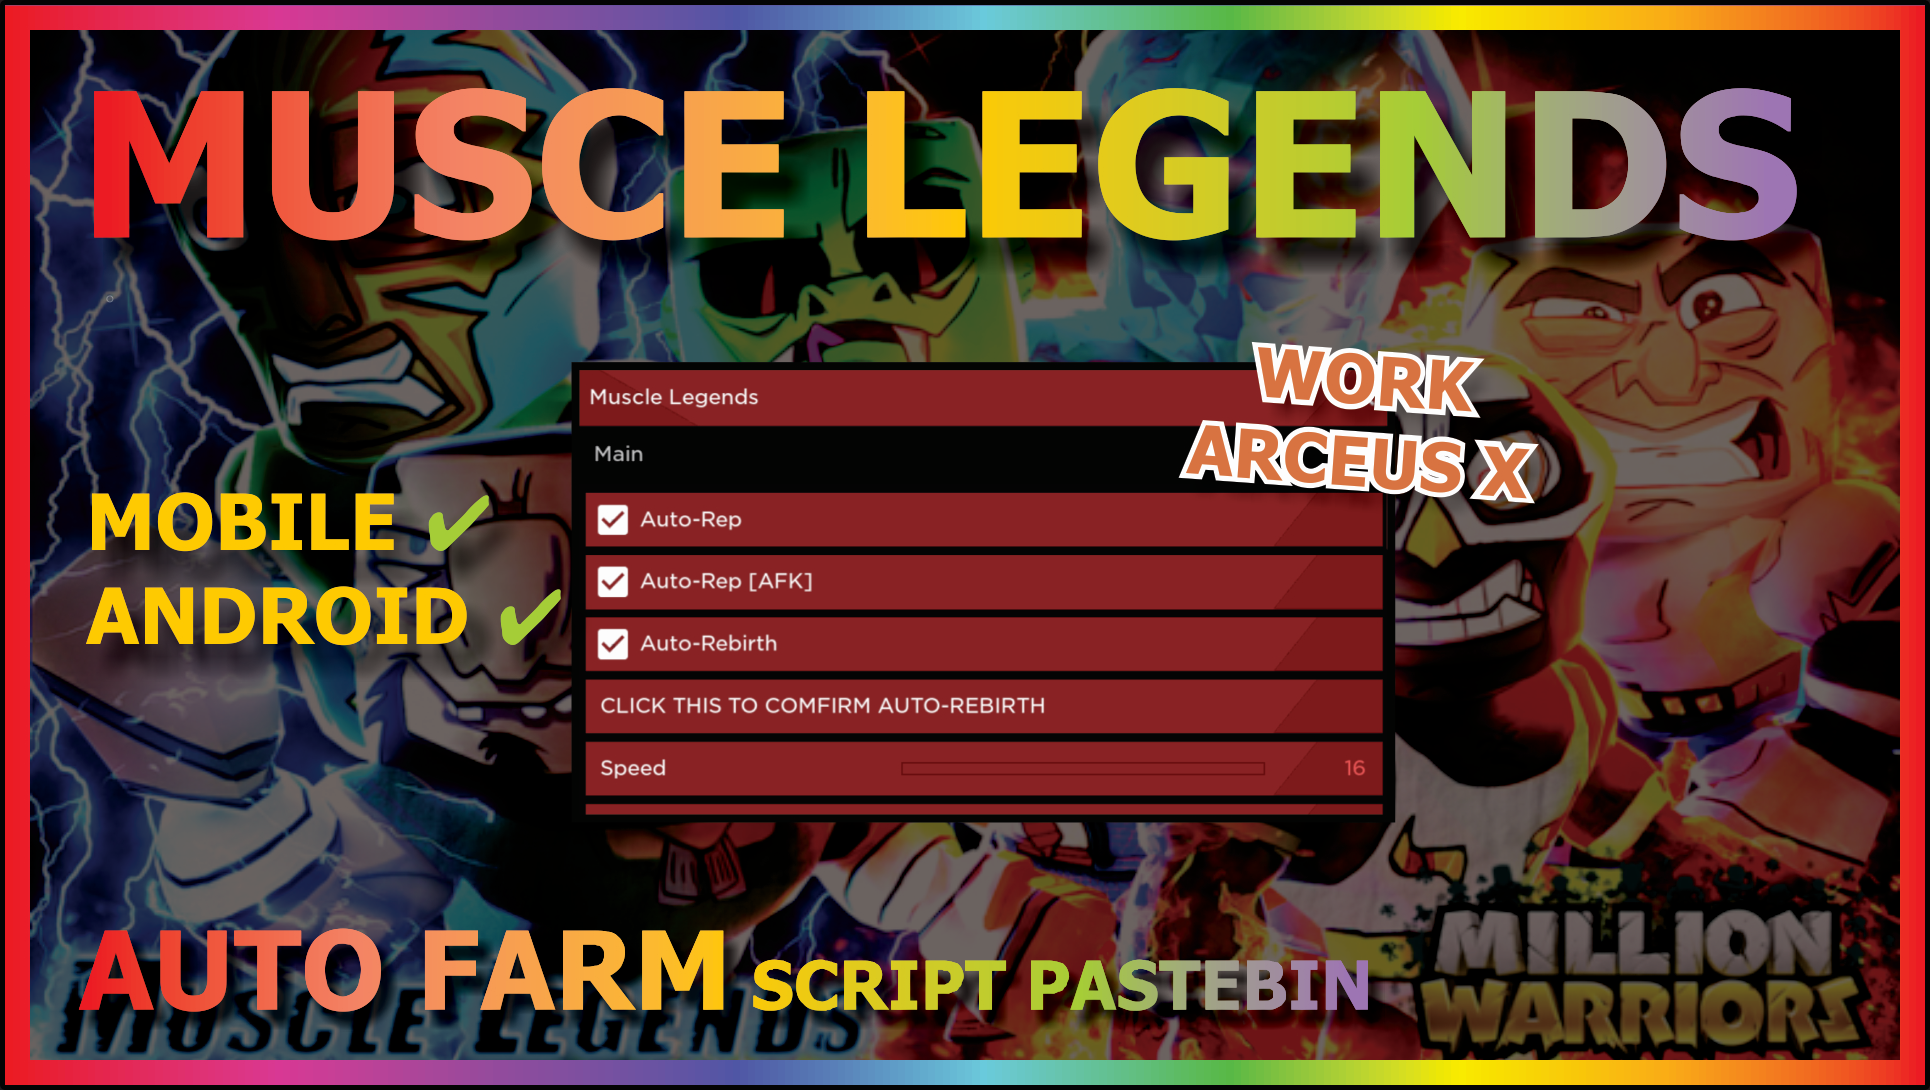 Muscle Legends: Redeem All Codes, Claim All Chests, Player Settings Scripts